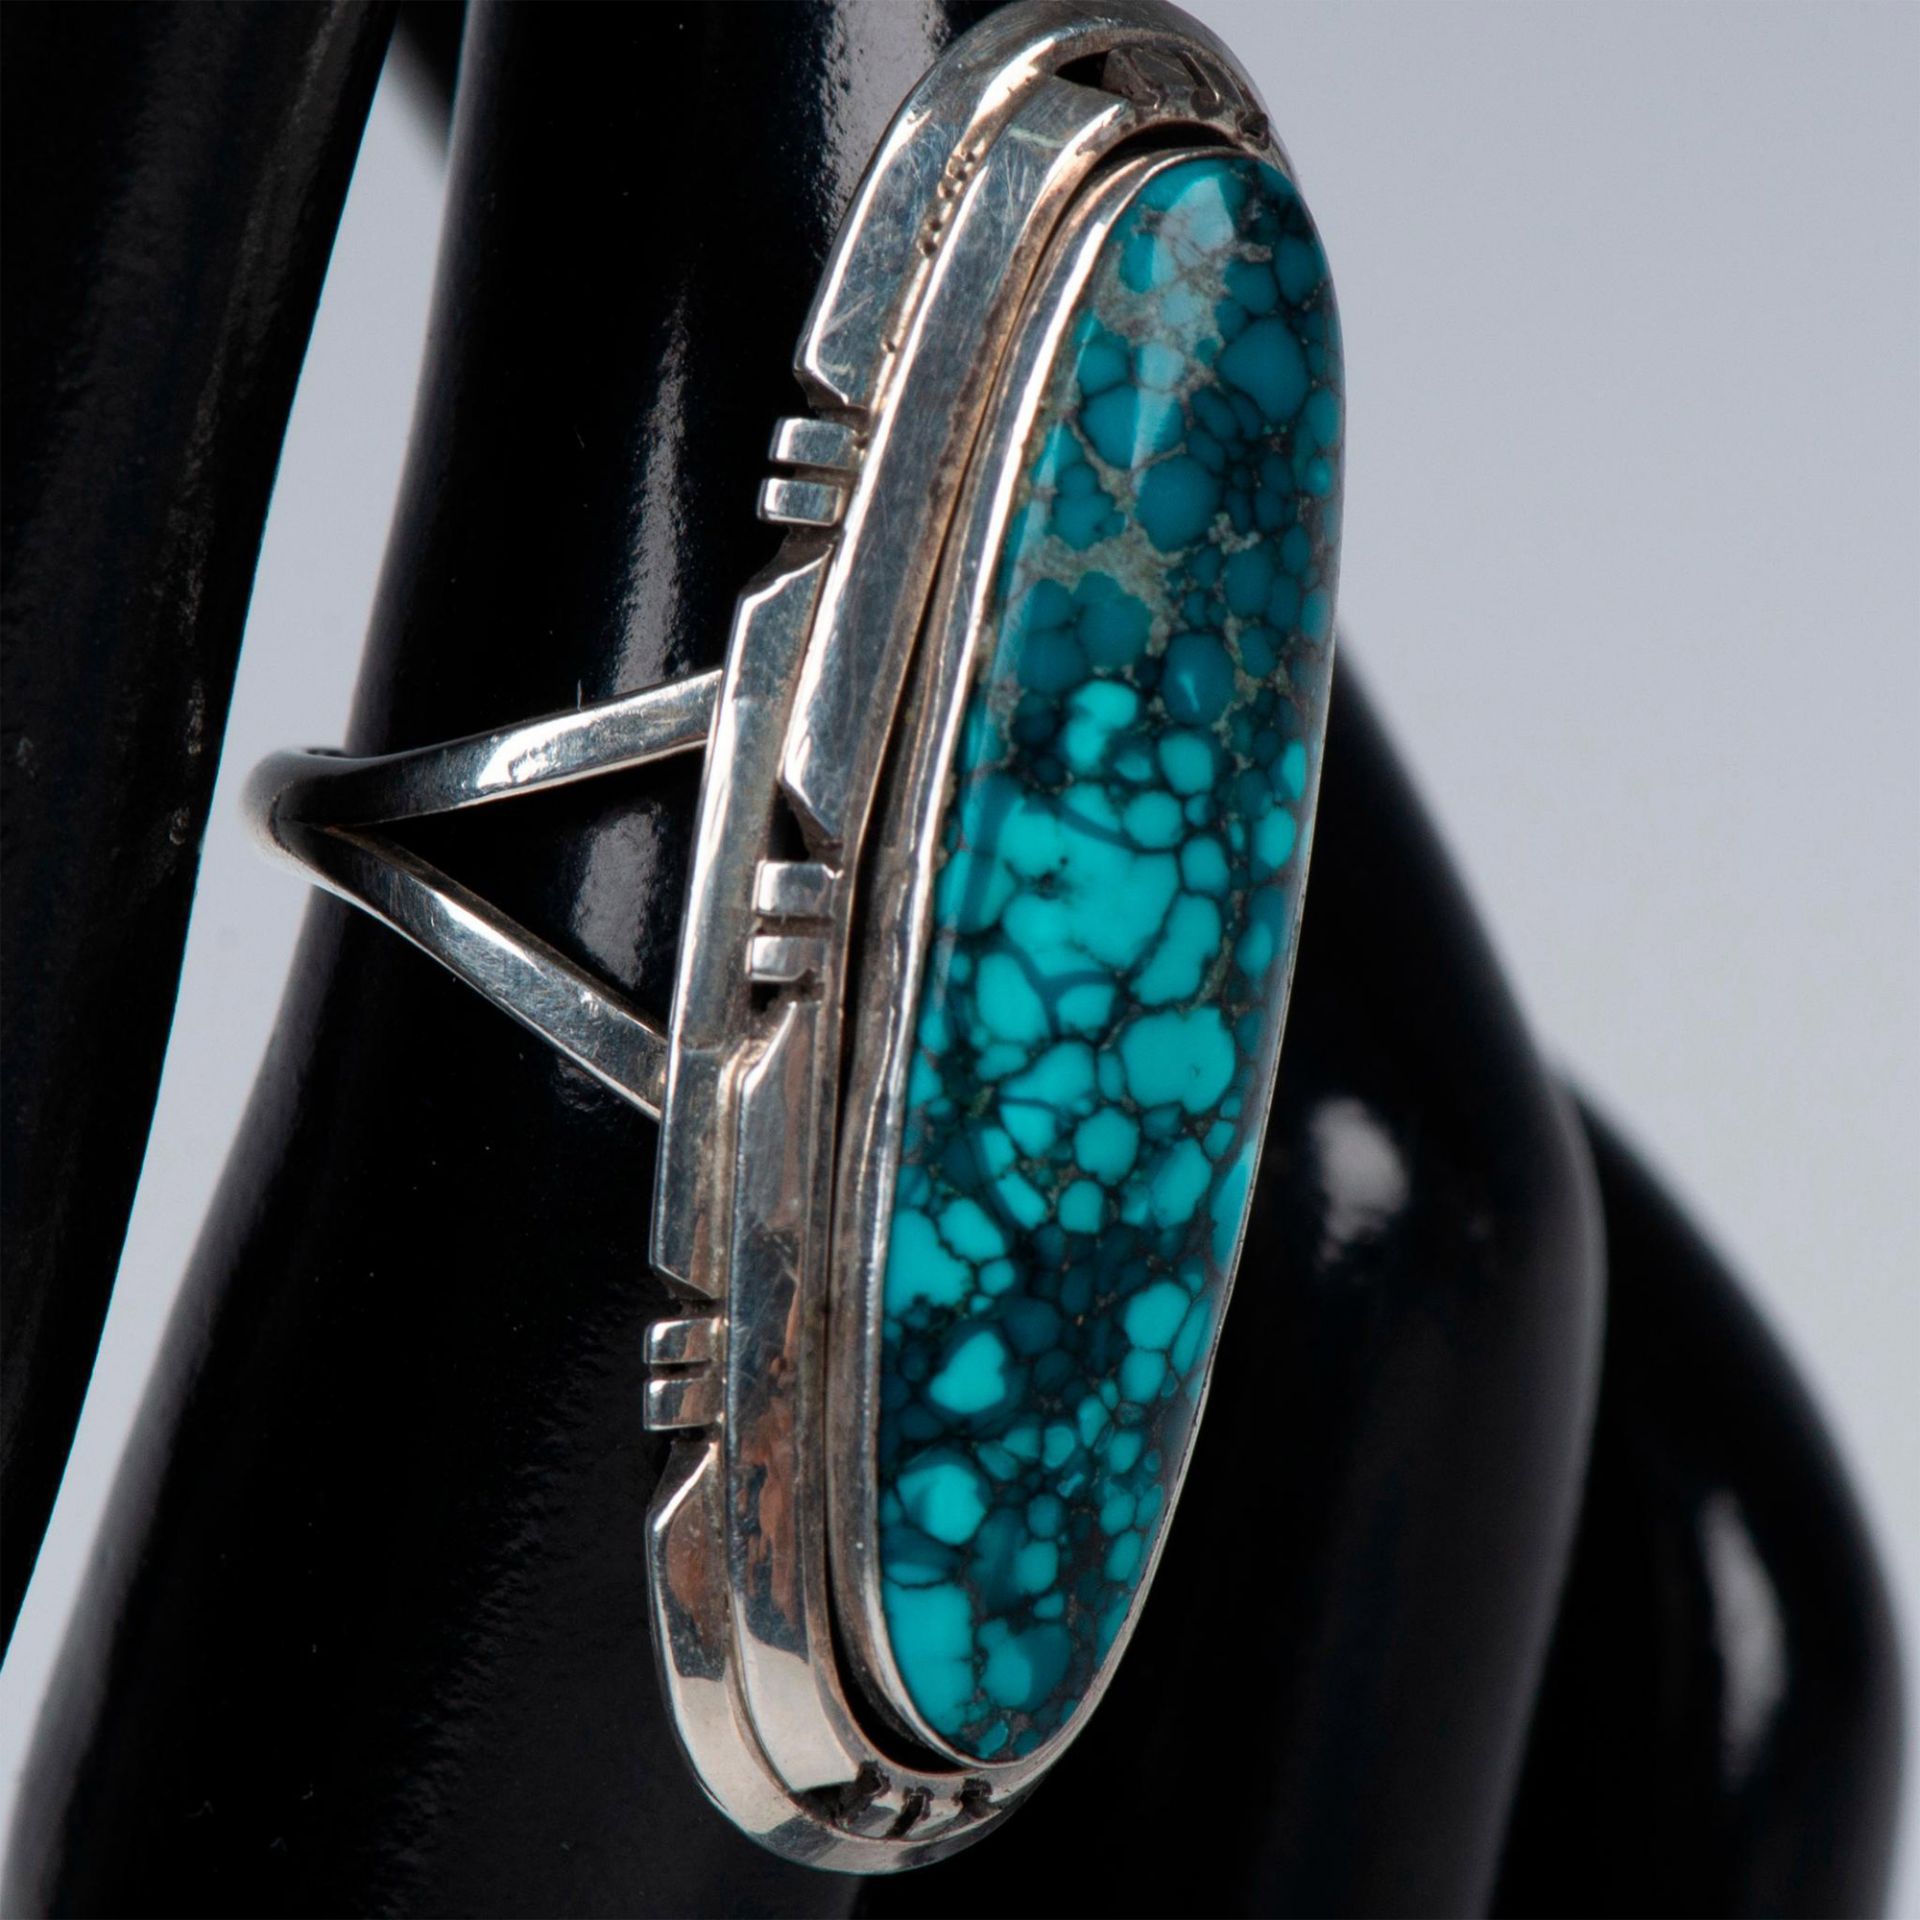 B. Piaso Navajo Sterling Silver & Spiderweb Turquoise Ring - Image 2 of 6